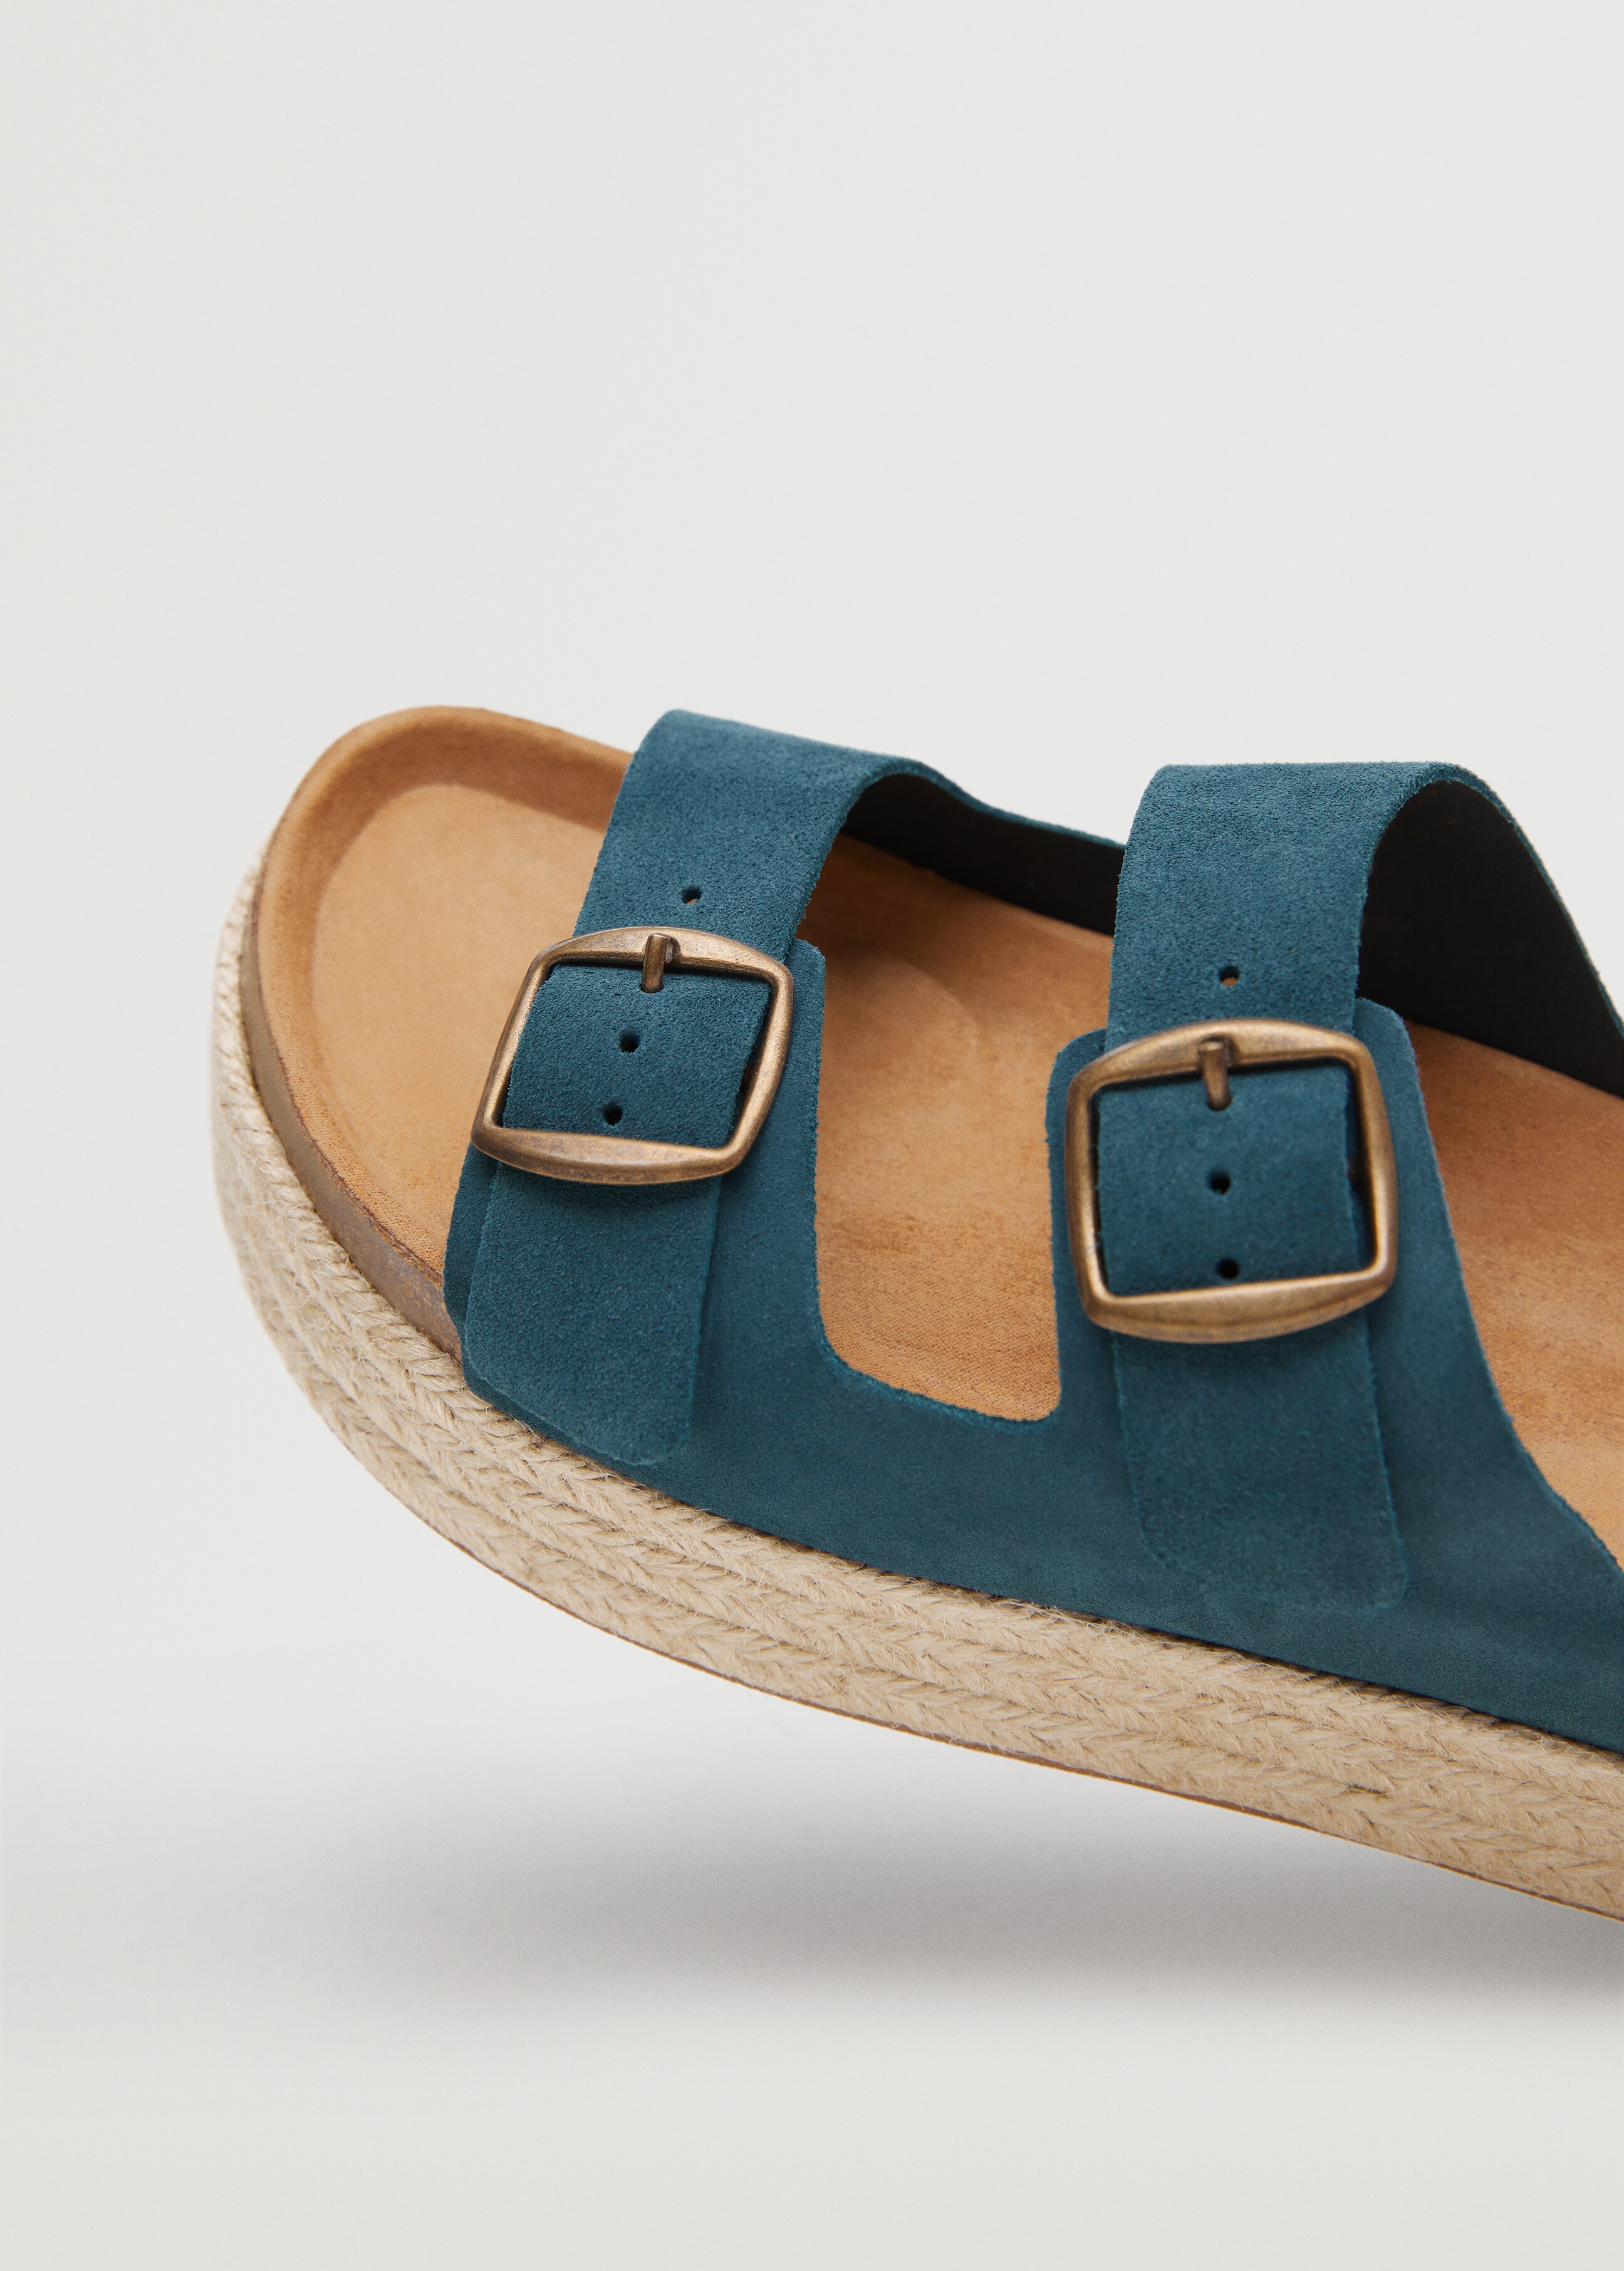 Esparto leather sandals - Details of the article 2